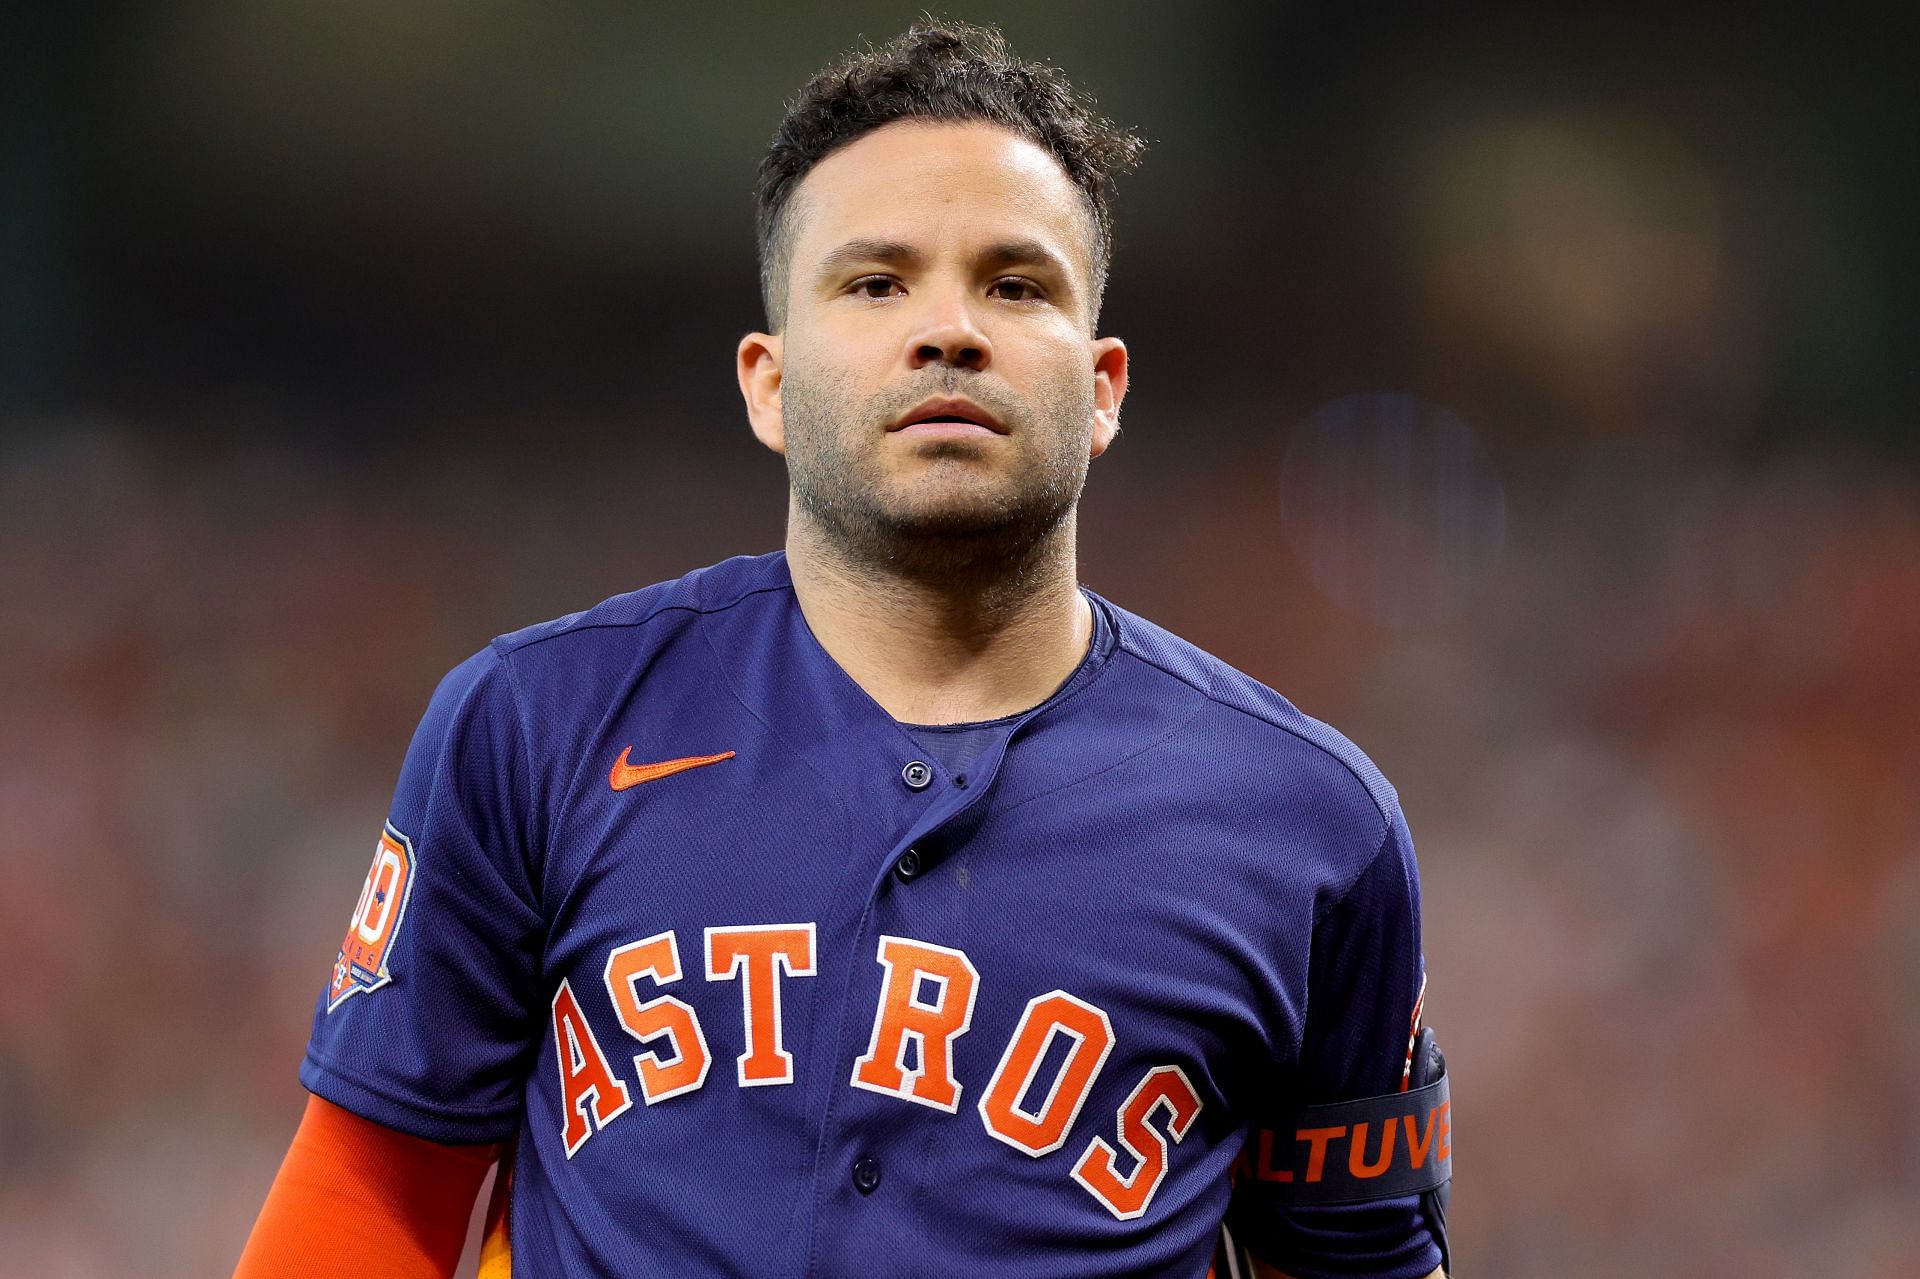 Astros' Jose Altuve wants to retire with team, play until age 40